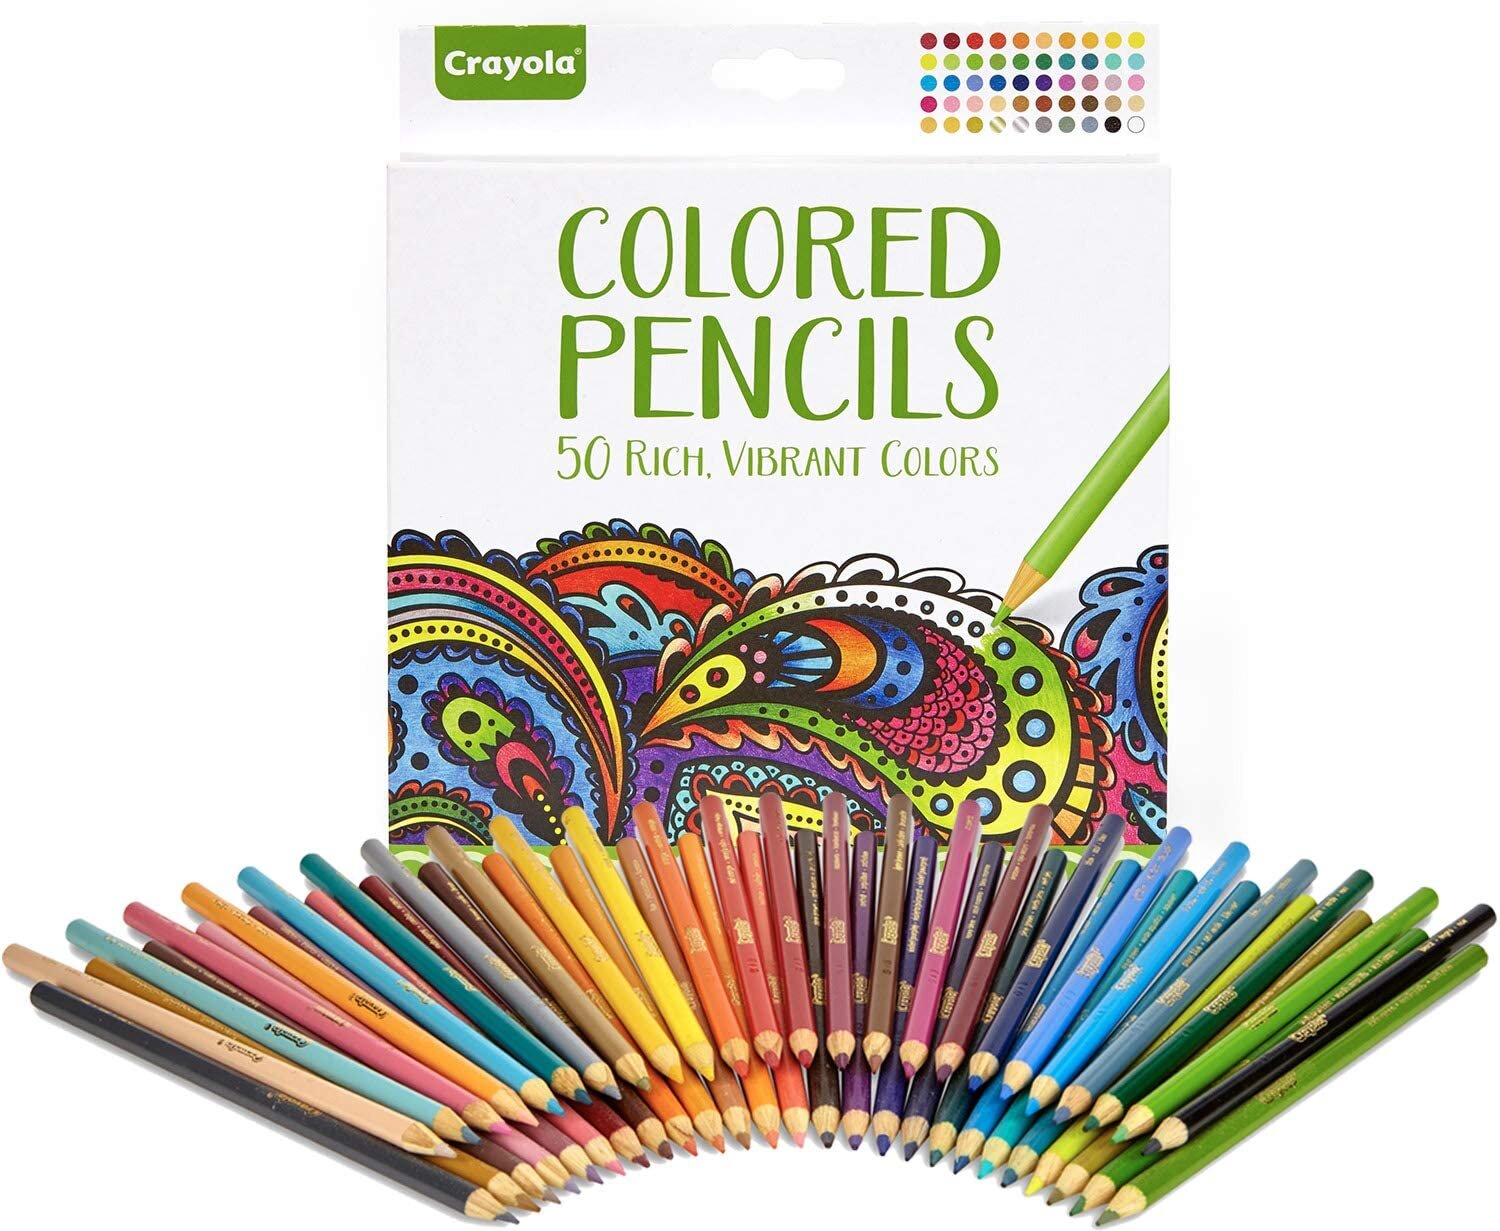  Color pencils for all kids art projects. 